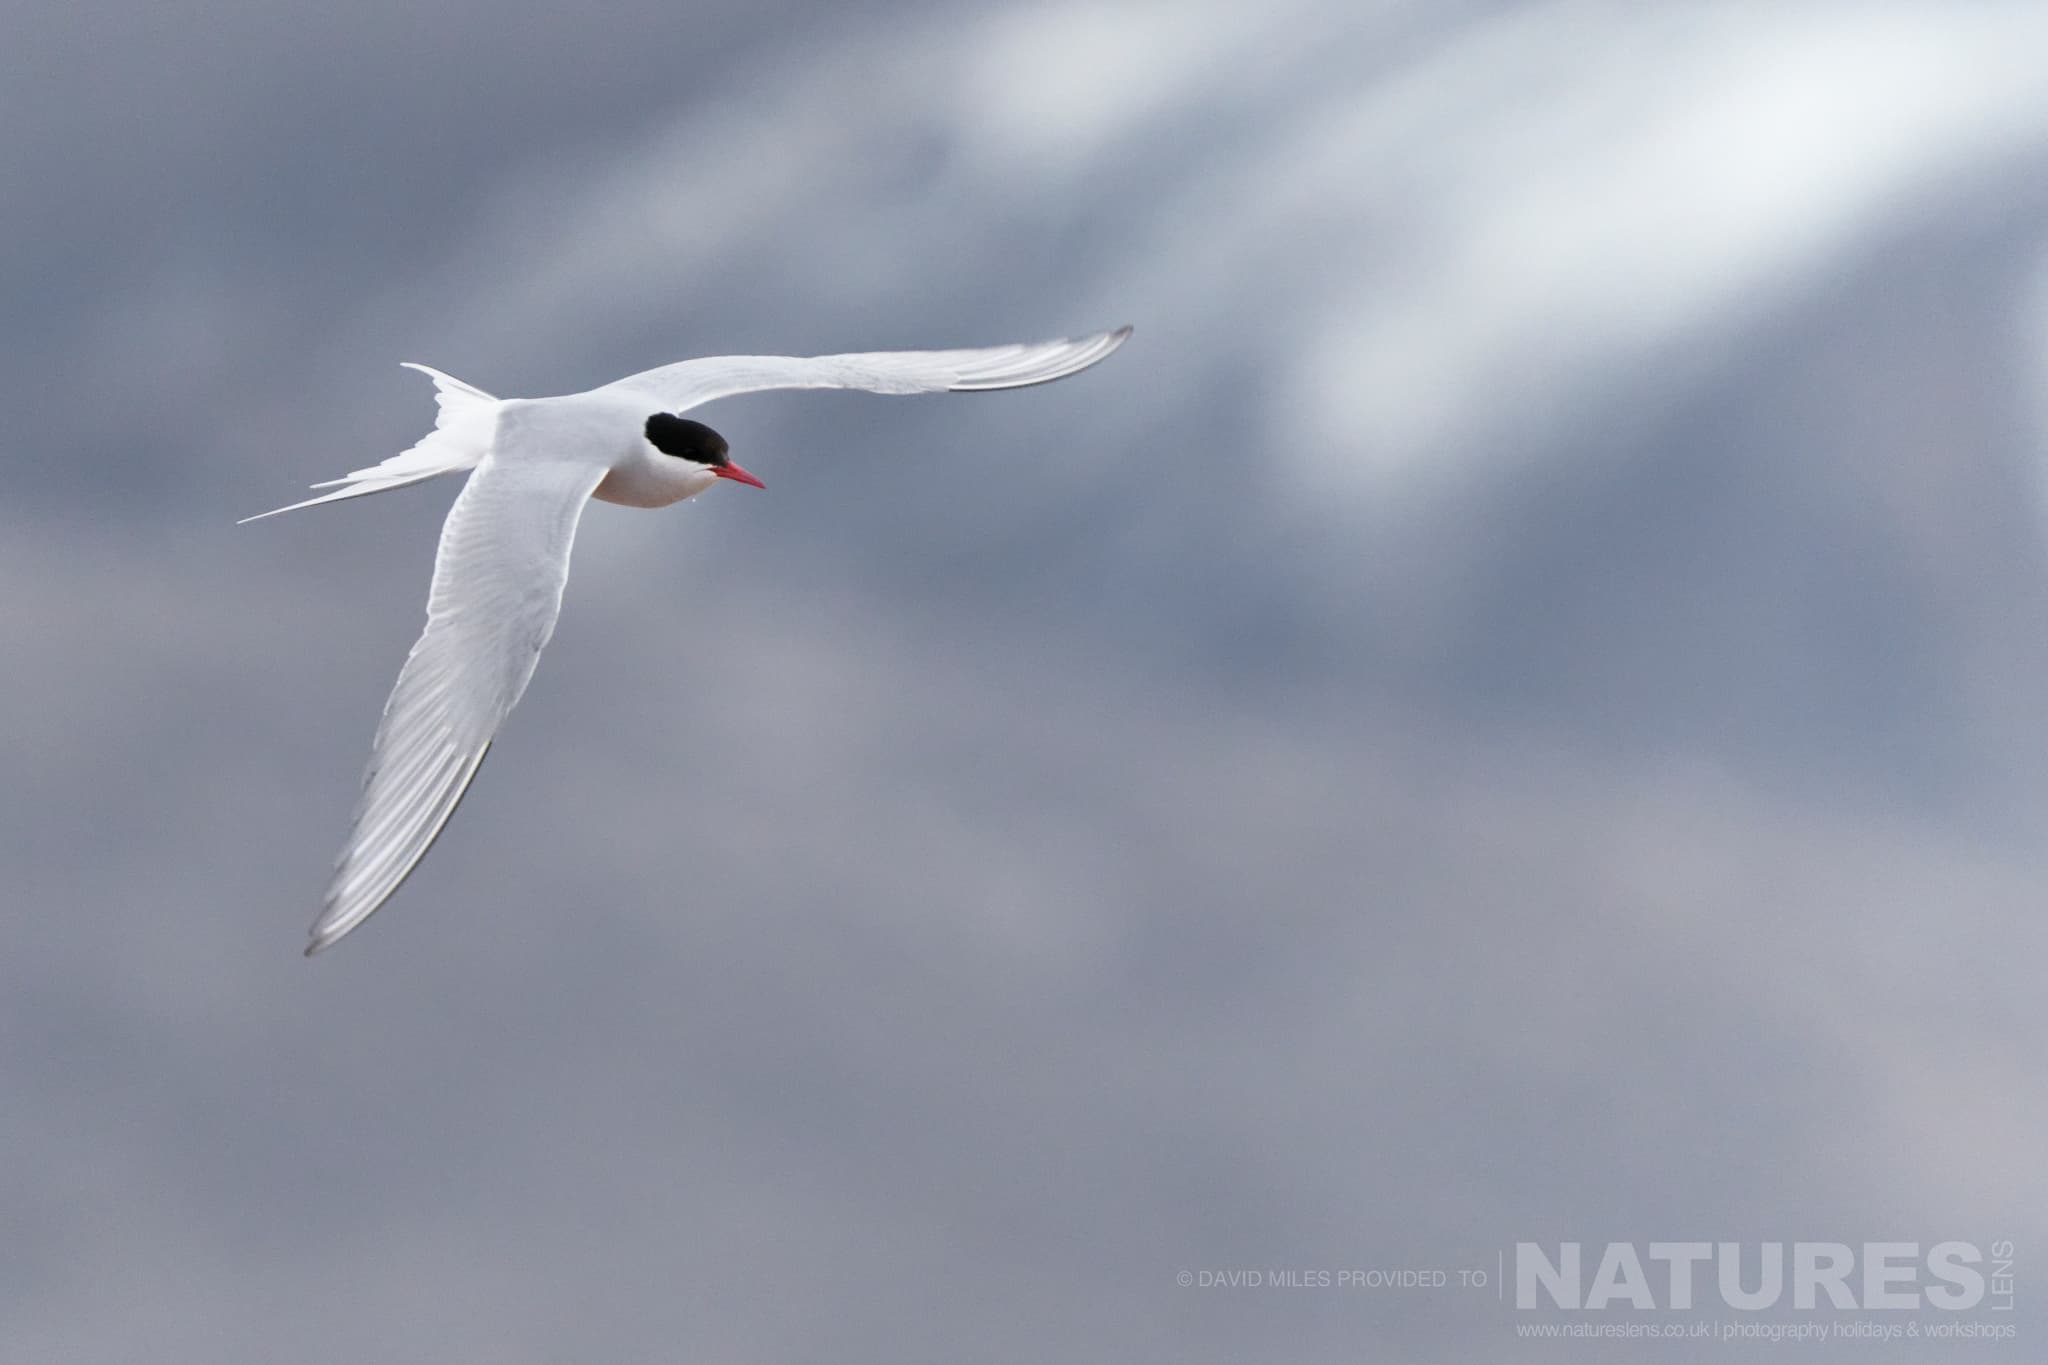 An Arctic Tern Typical Of The Kind Of Image We Hope You Will Capture During Our Polar Wildlife Of Svalbard Photography Holiday